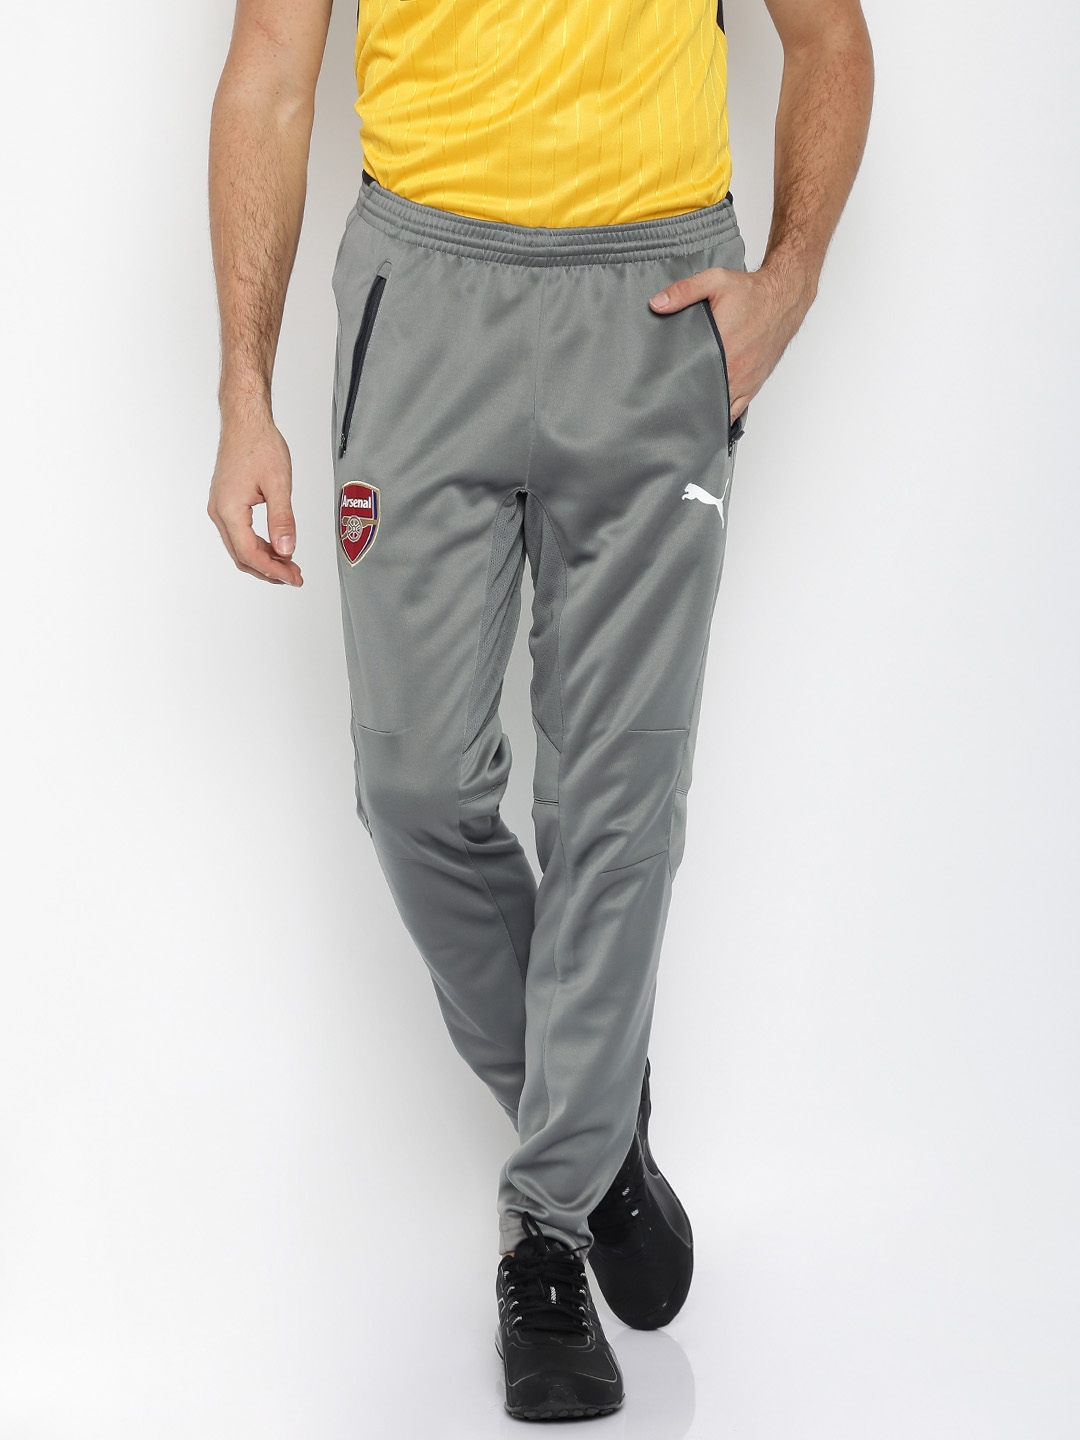 Buy PUMA Mens Grey Motosport Track Pant Online at Low Prices in India   Paytmmallcom